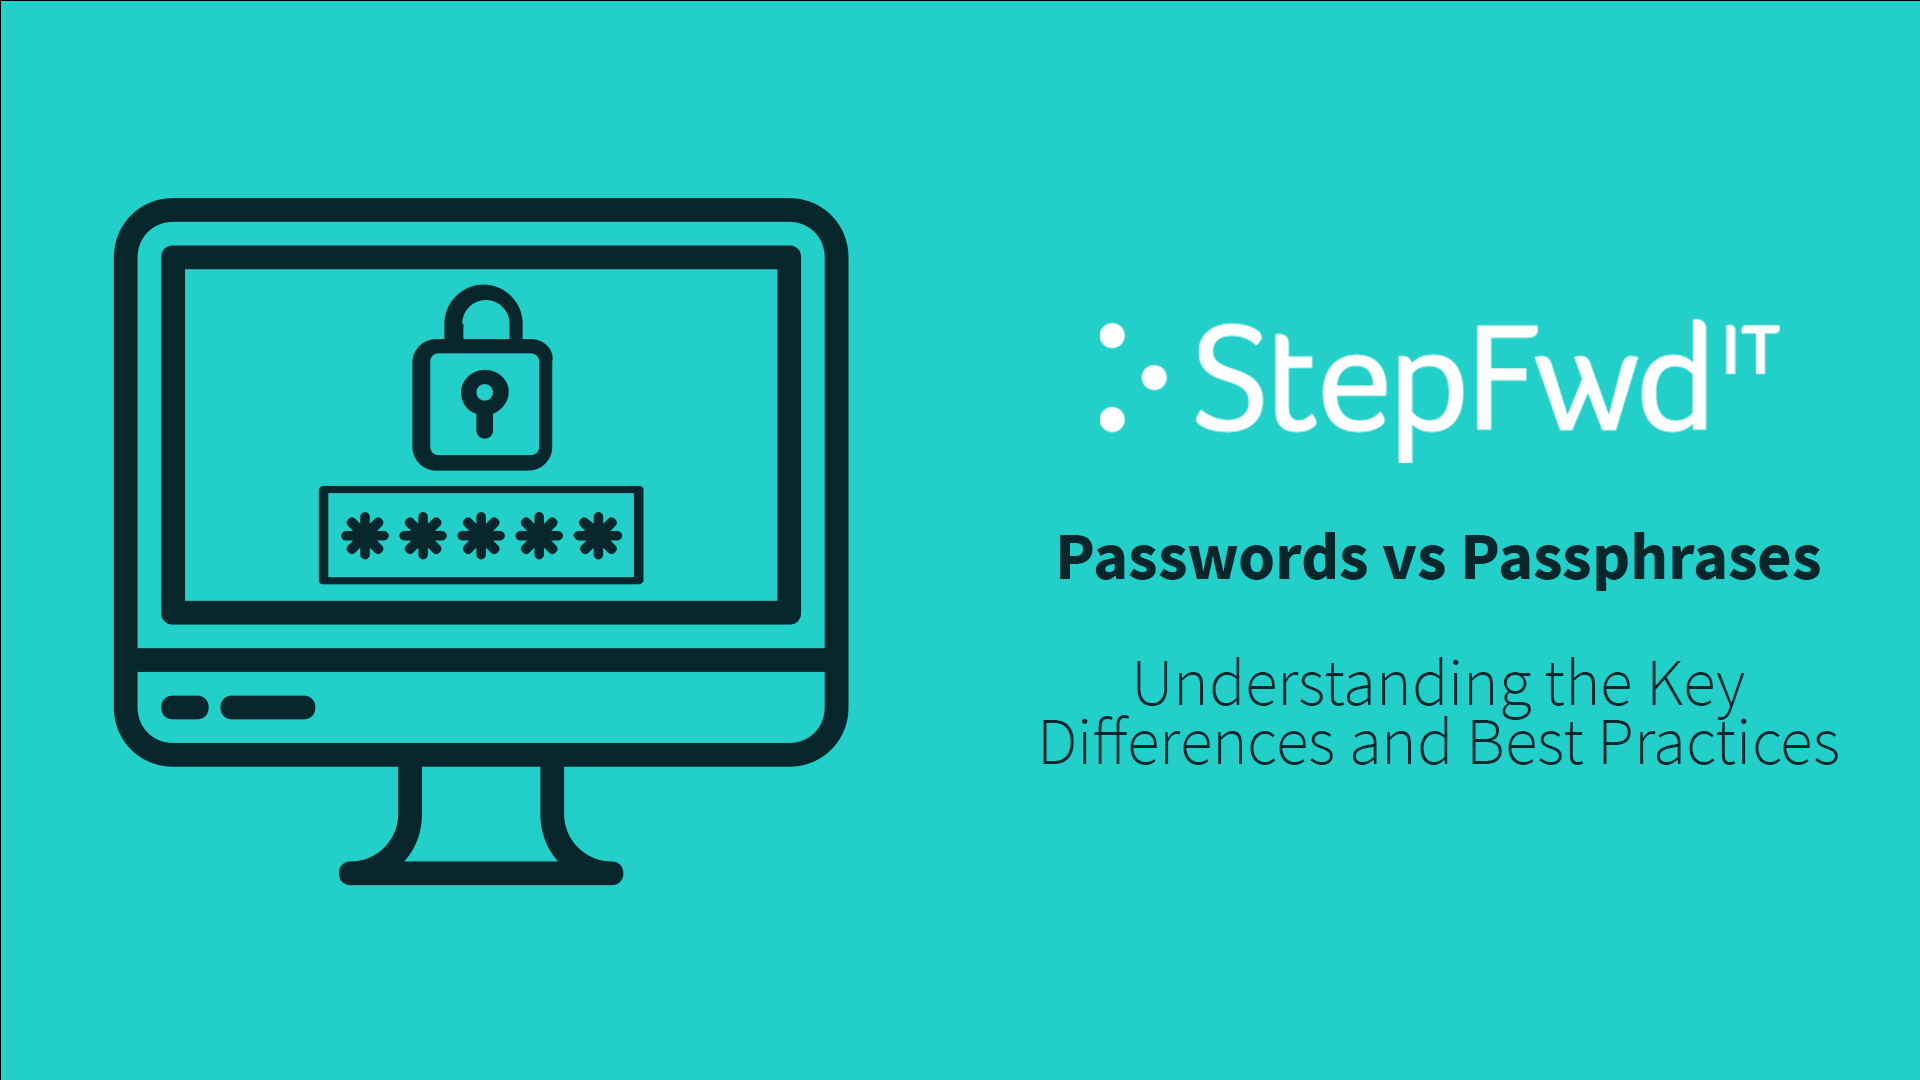 Passwords vs Passphrases: Understanding the Key Differences and Best Practices